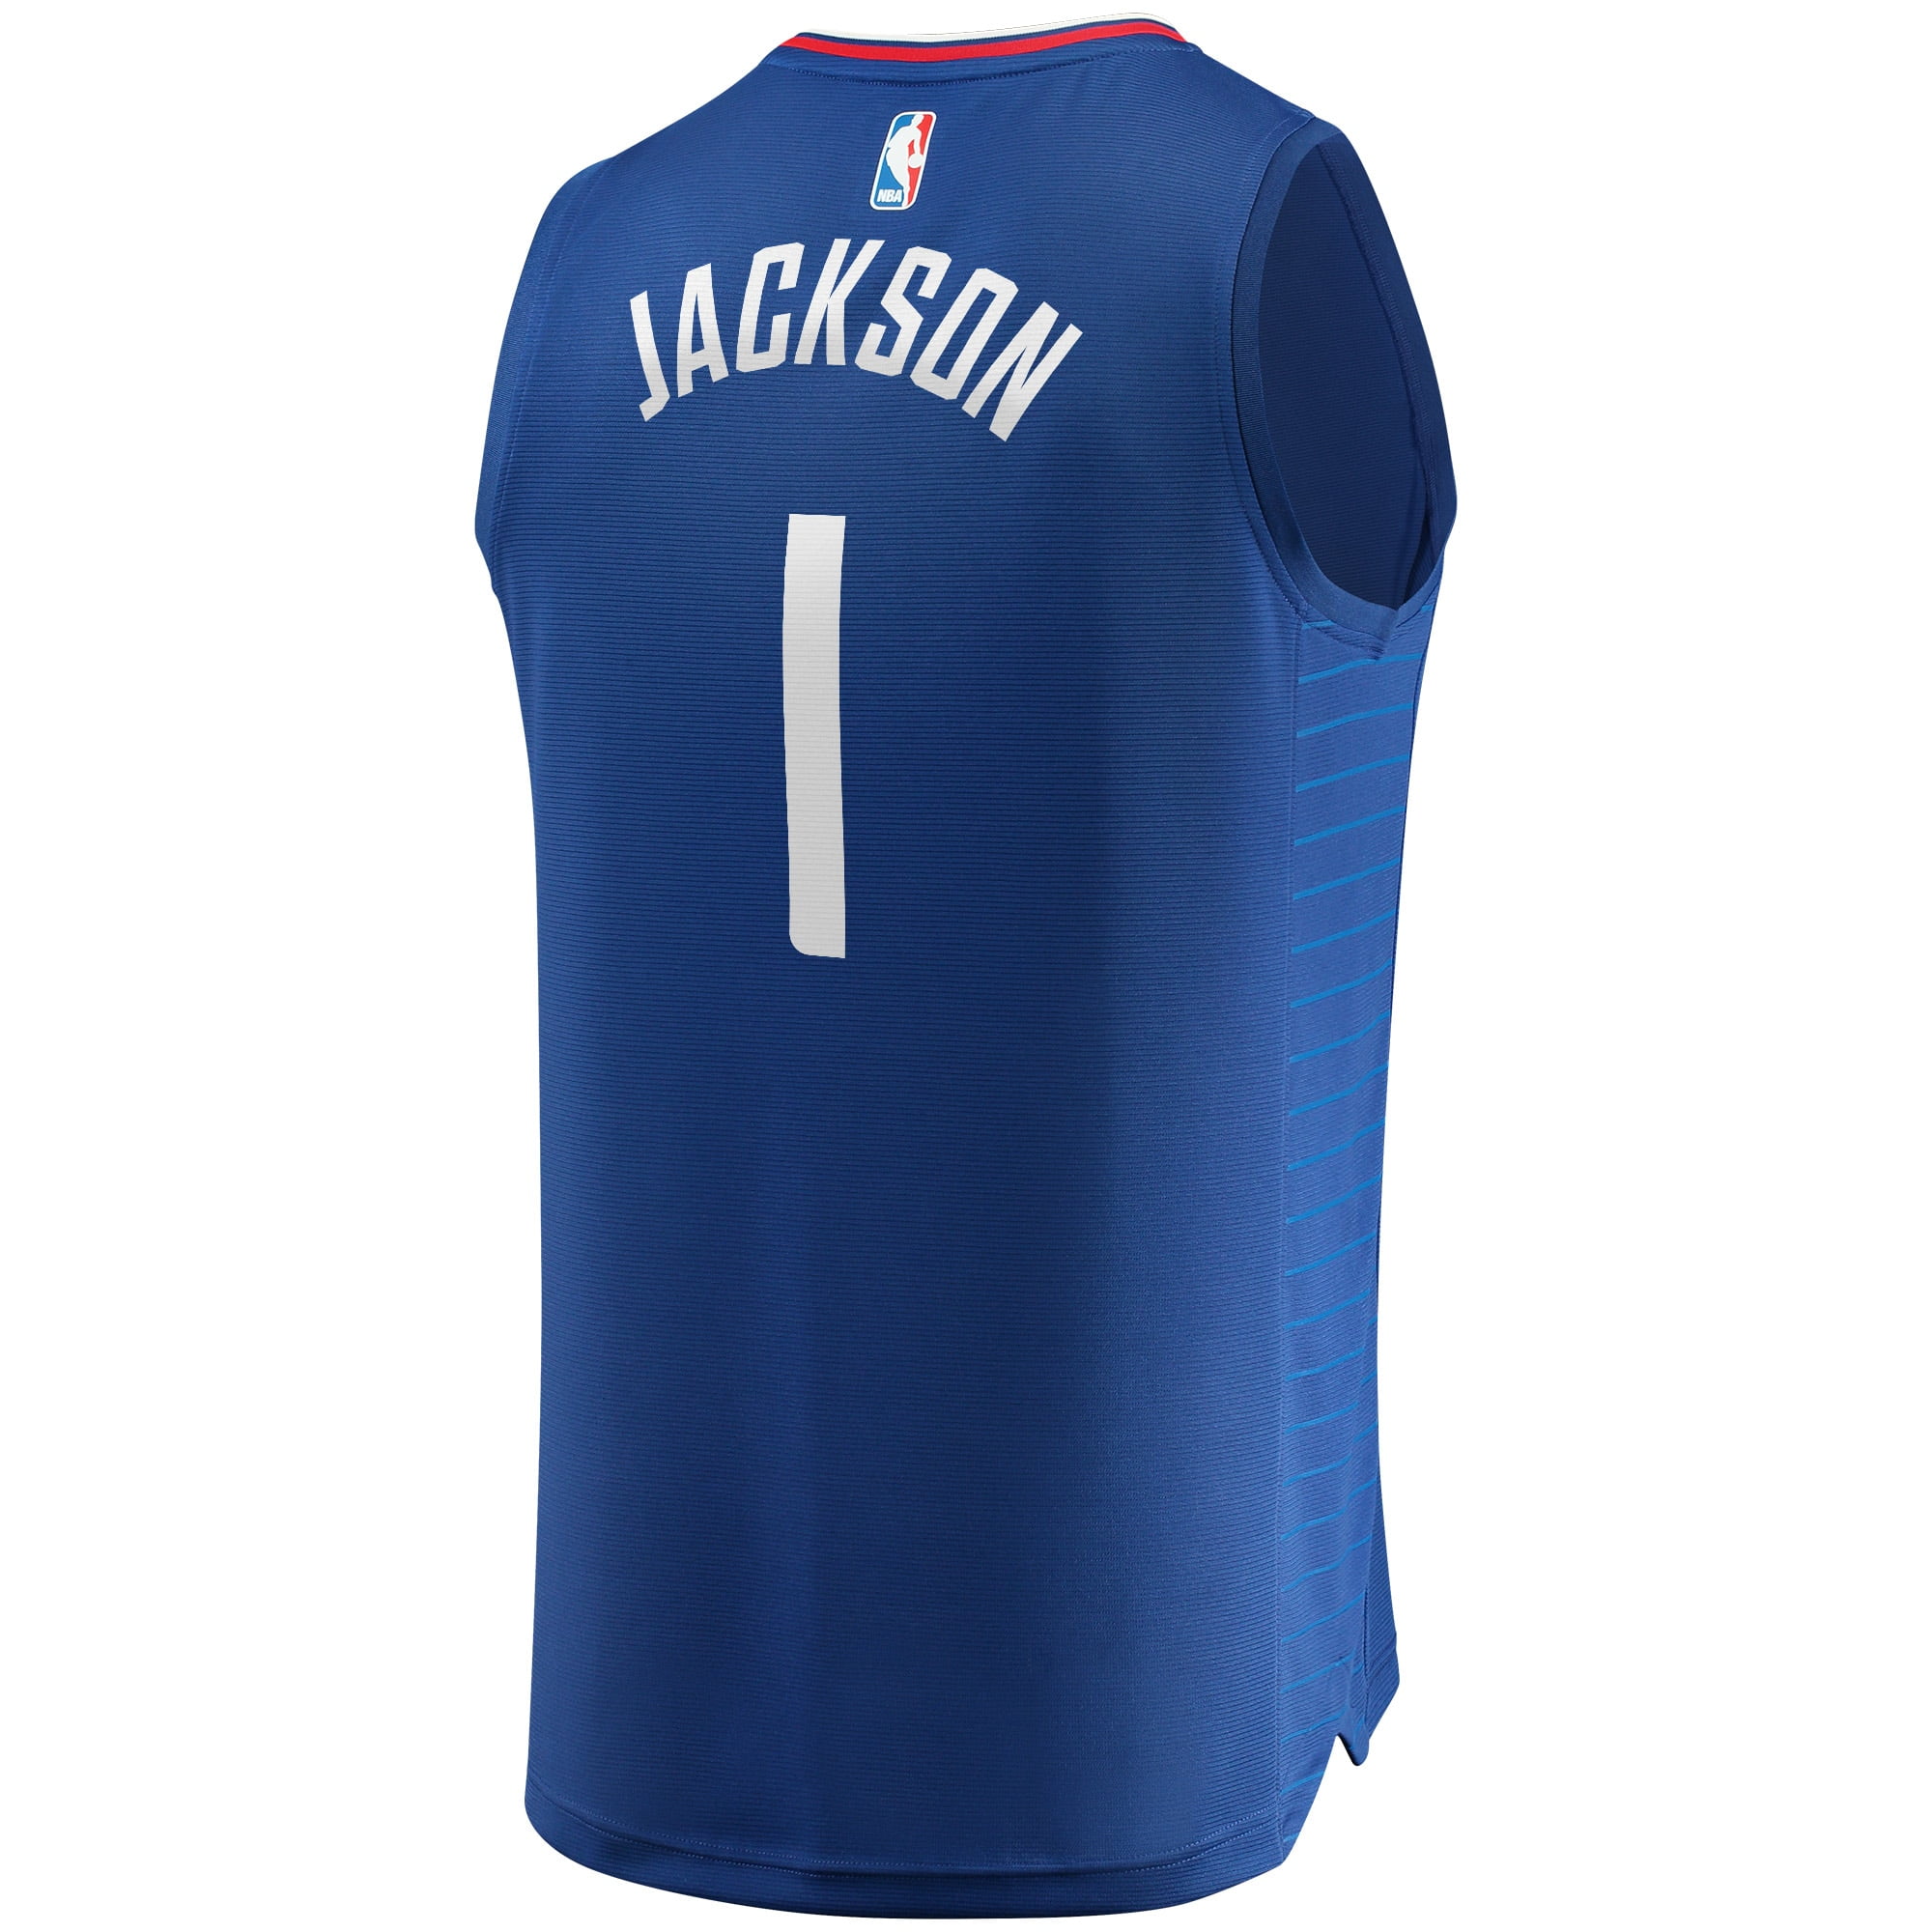 clippers icon jersey